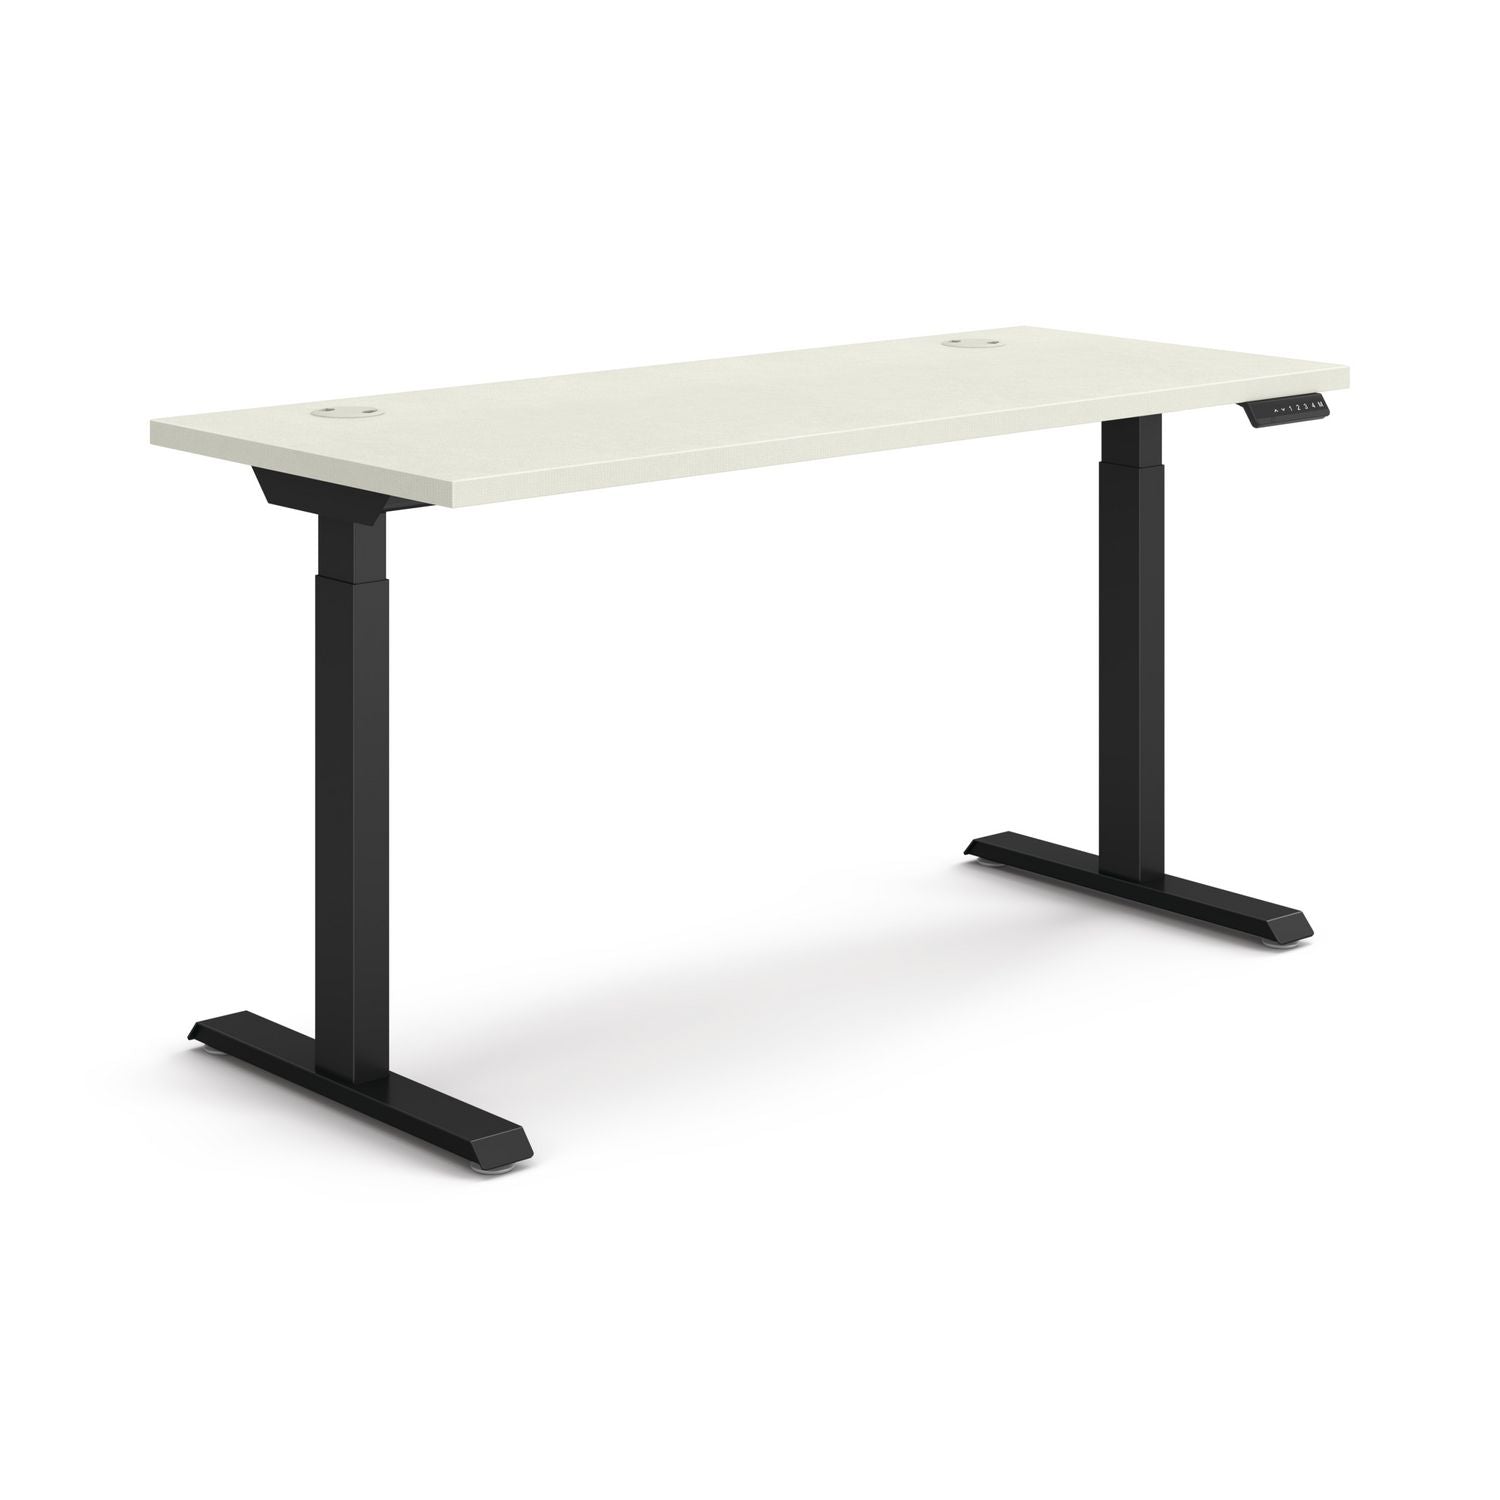 coordinate-height-adjustable-desk-bundle-2-stage-58-x-22-x-2775-to-47-silver-mesh\\black-ships-in-7-10-business-days_honhat2smbk2258 - 1